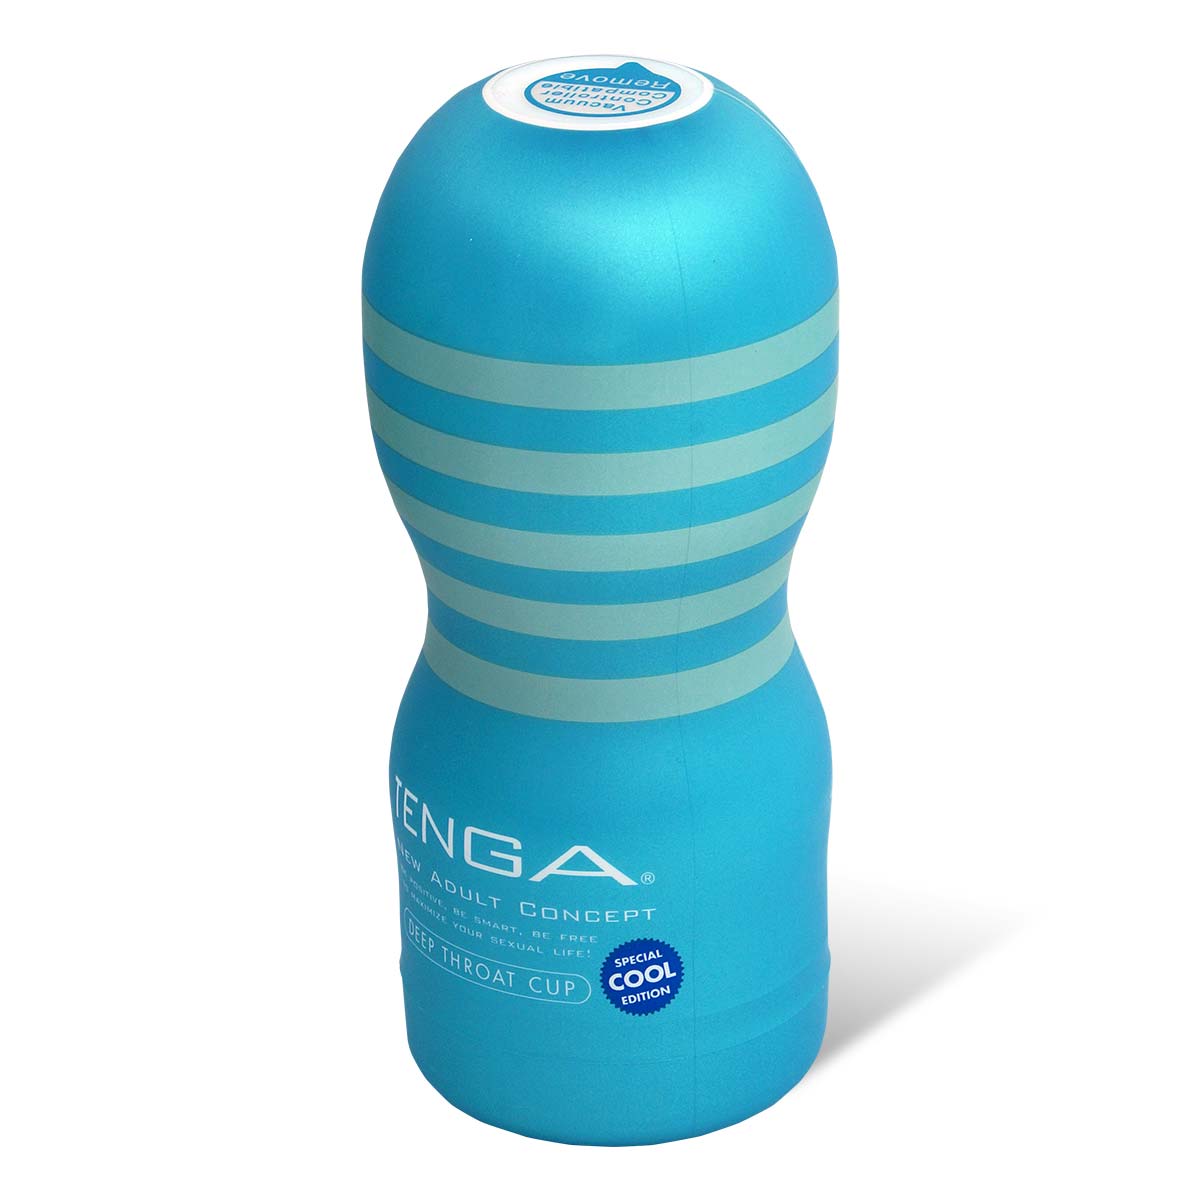 TENGA DEEP THROAT CUP SPECIAL COOL EDITION-p_1